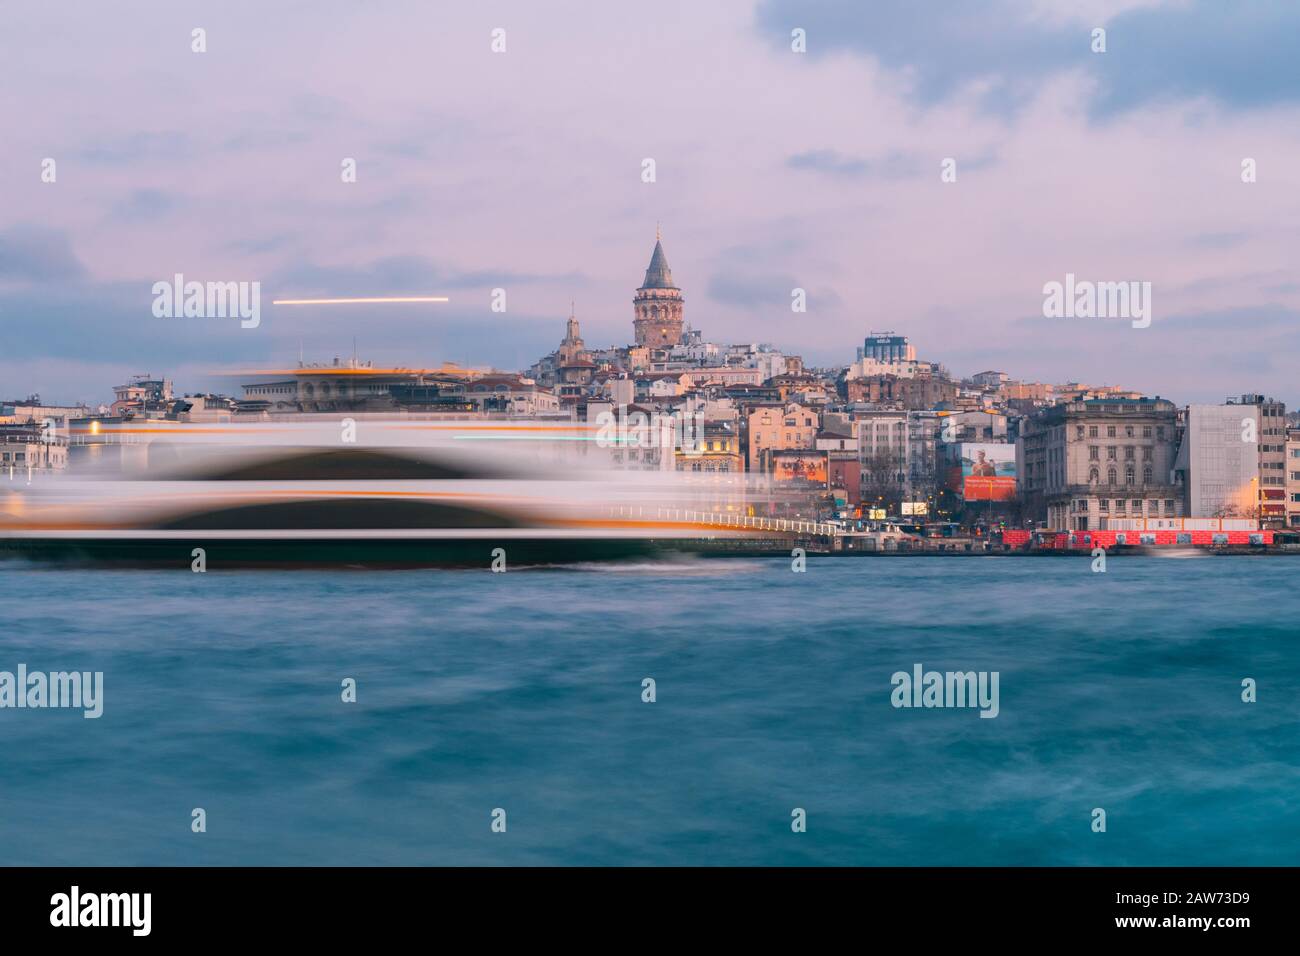 Istanbul, Turkey - Jan 15, 2020: Galata Tower with Ferry Boat in Golden Horn , Istanbul, Turkey, Stock Photo